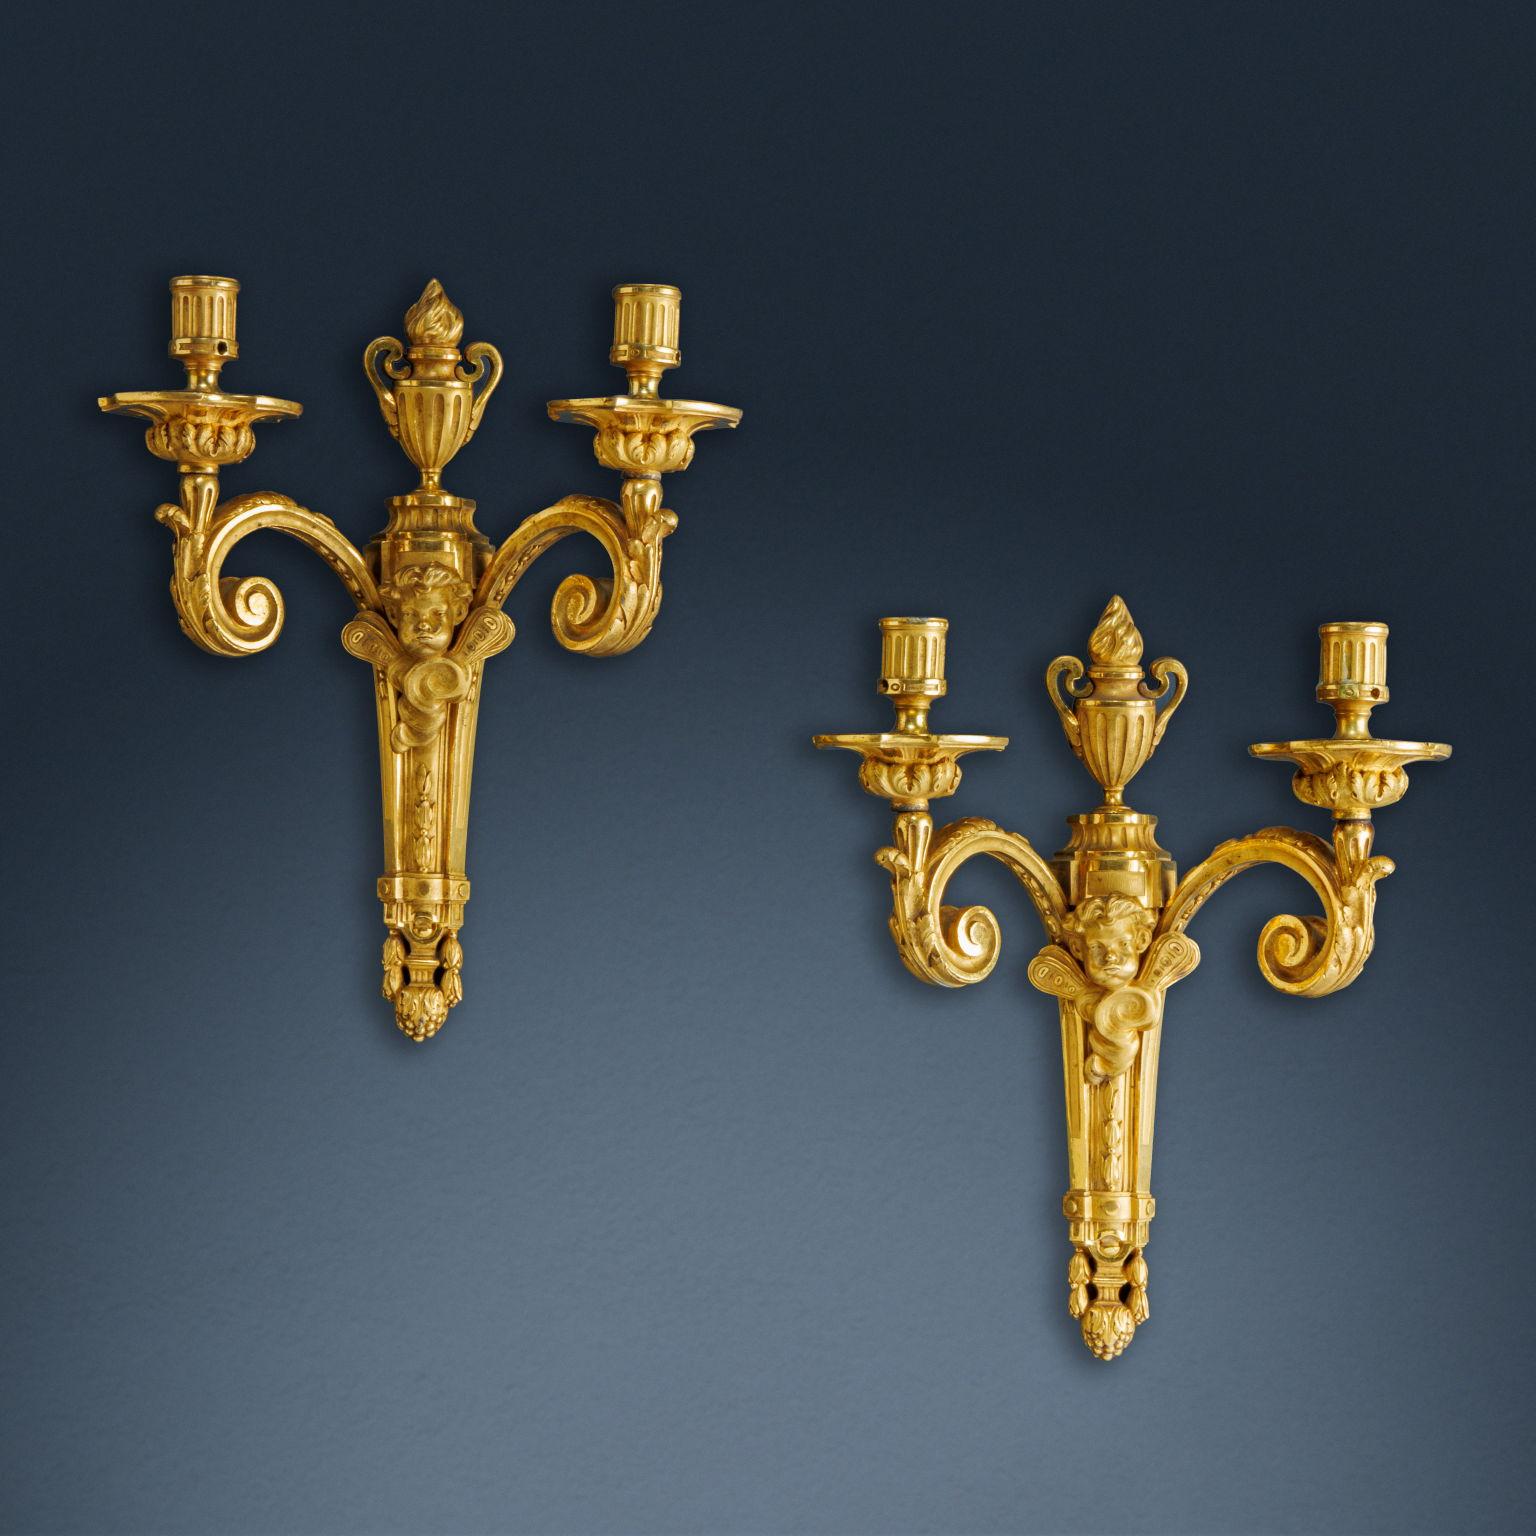 Pair of two-light wall sconces made of chased and gilded bronze. Two arms with leaf volutes take their shape from a central shaft, composed of a tapered semi-column, on which geometric elements alternate with phytomorphic motifs; the pilaster is